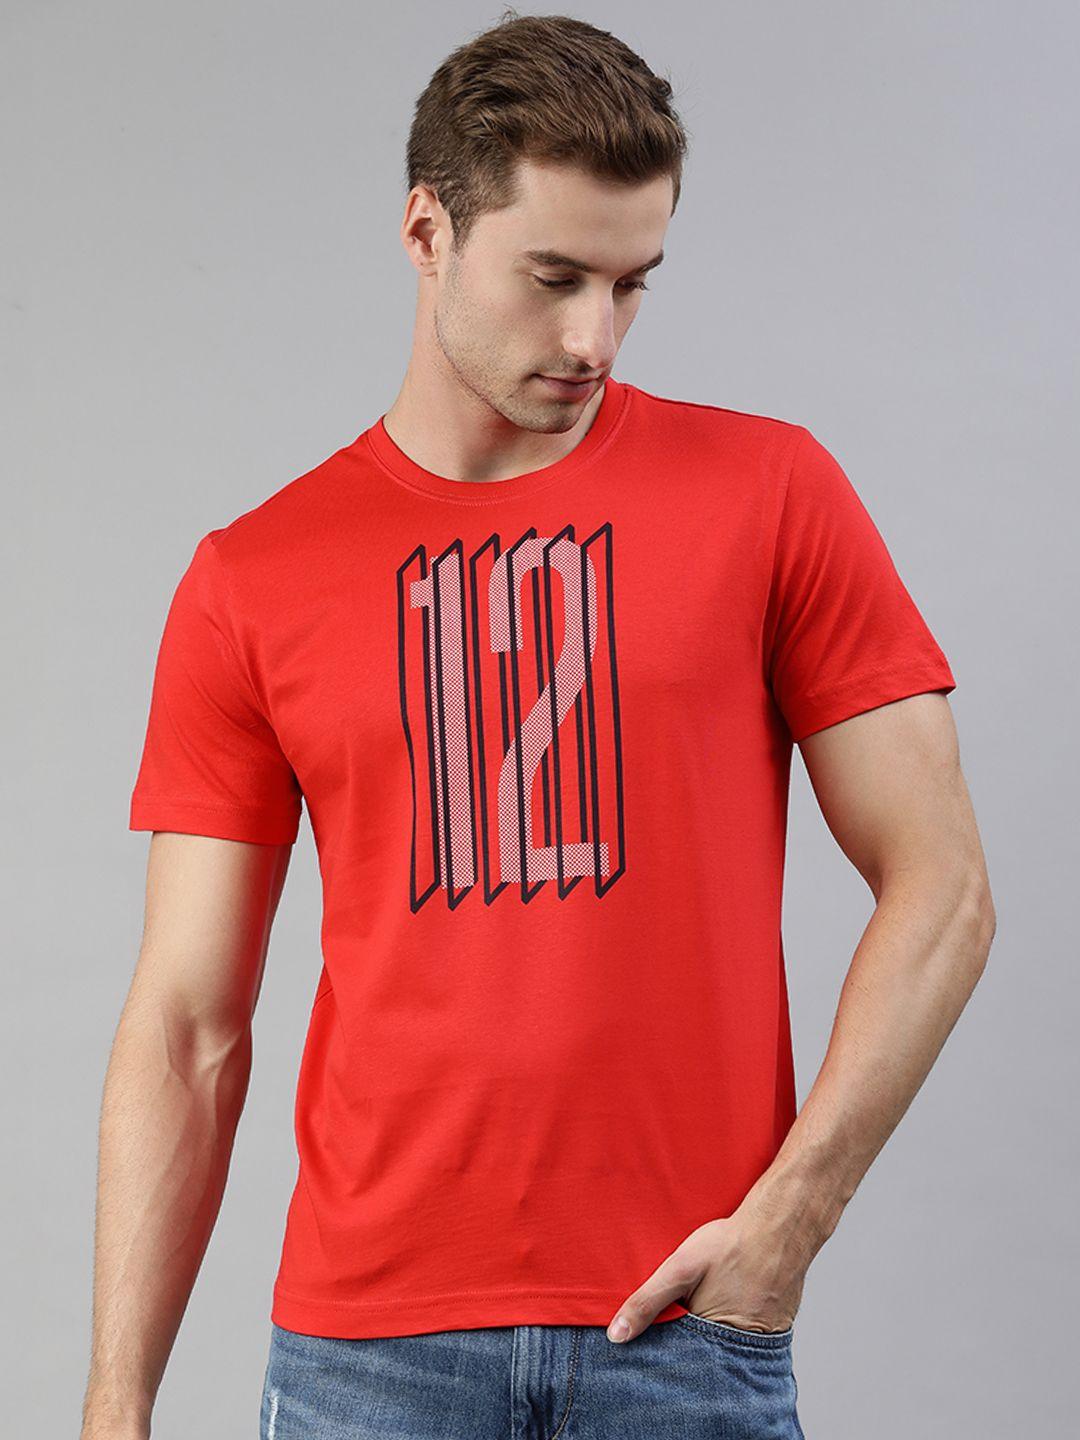 huetrap men red typography printed pure cotton t-shirt